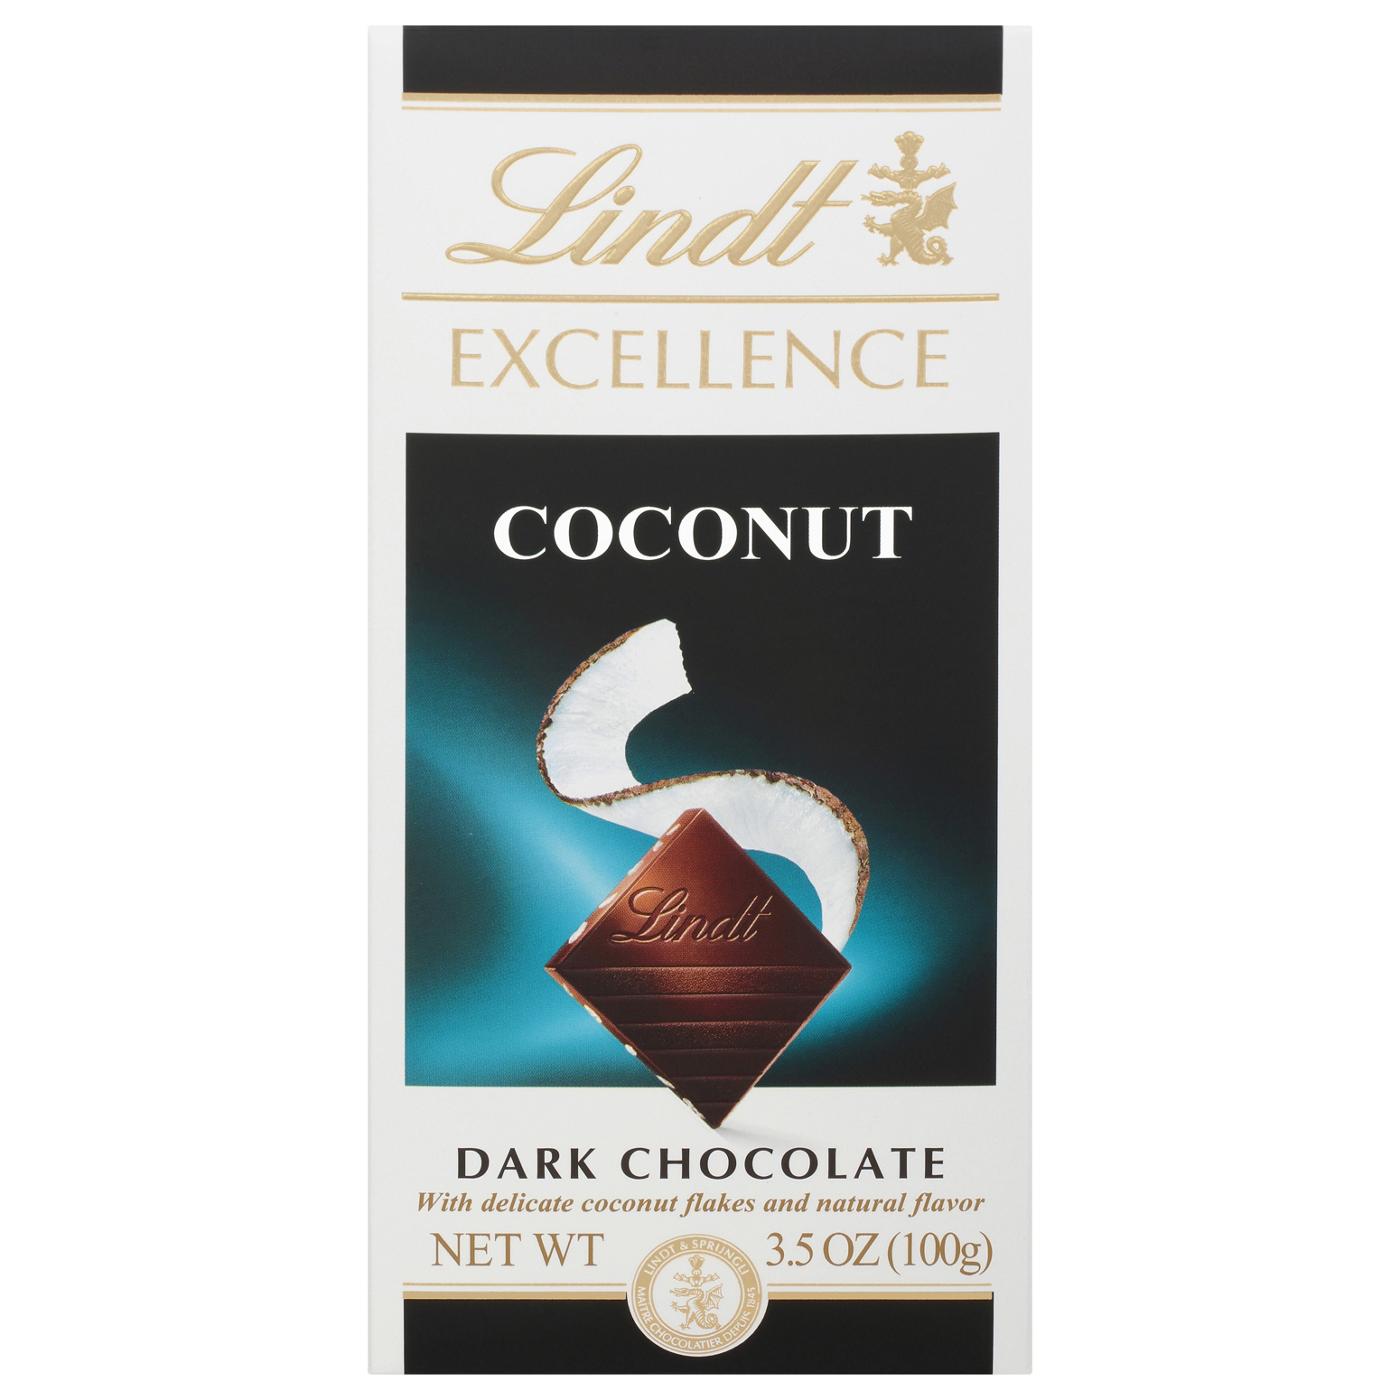 Lindt Excellence Coconut Dark Chocolate Bar; image 1 of 2